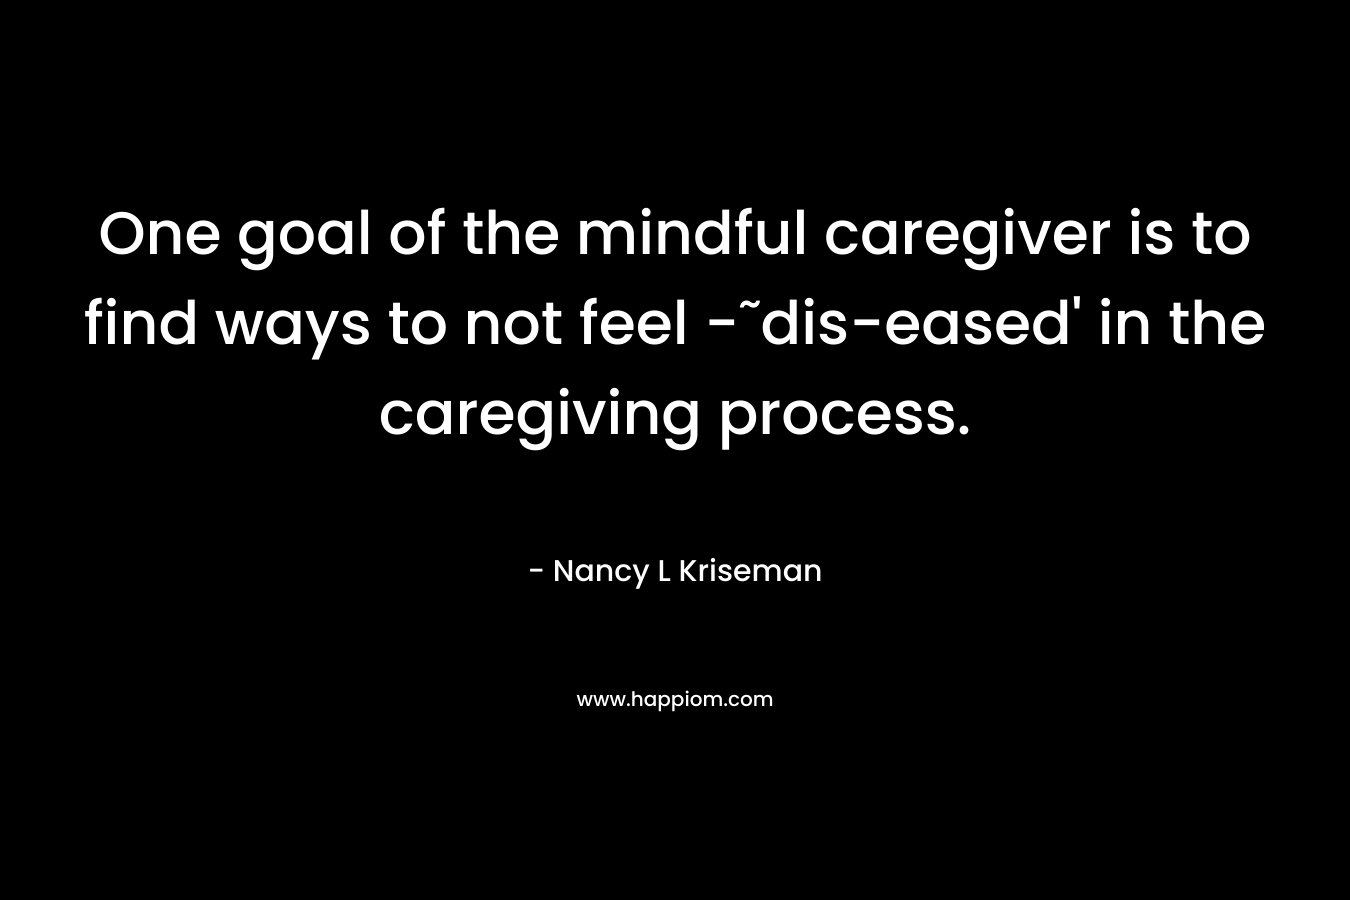 One goal of the mindful caregiver is to find ways to not feel -˜dis-eased’ in the caregiving process. – Nancy L Kriseman